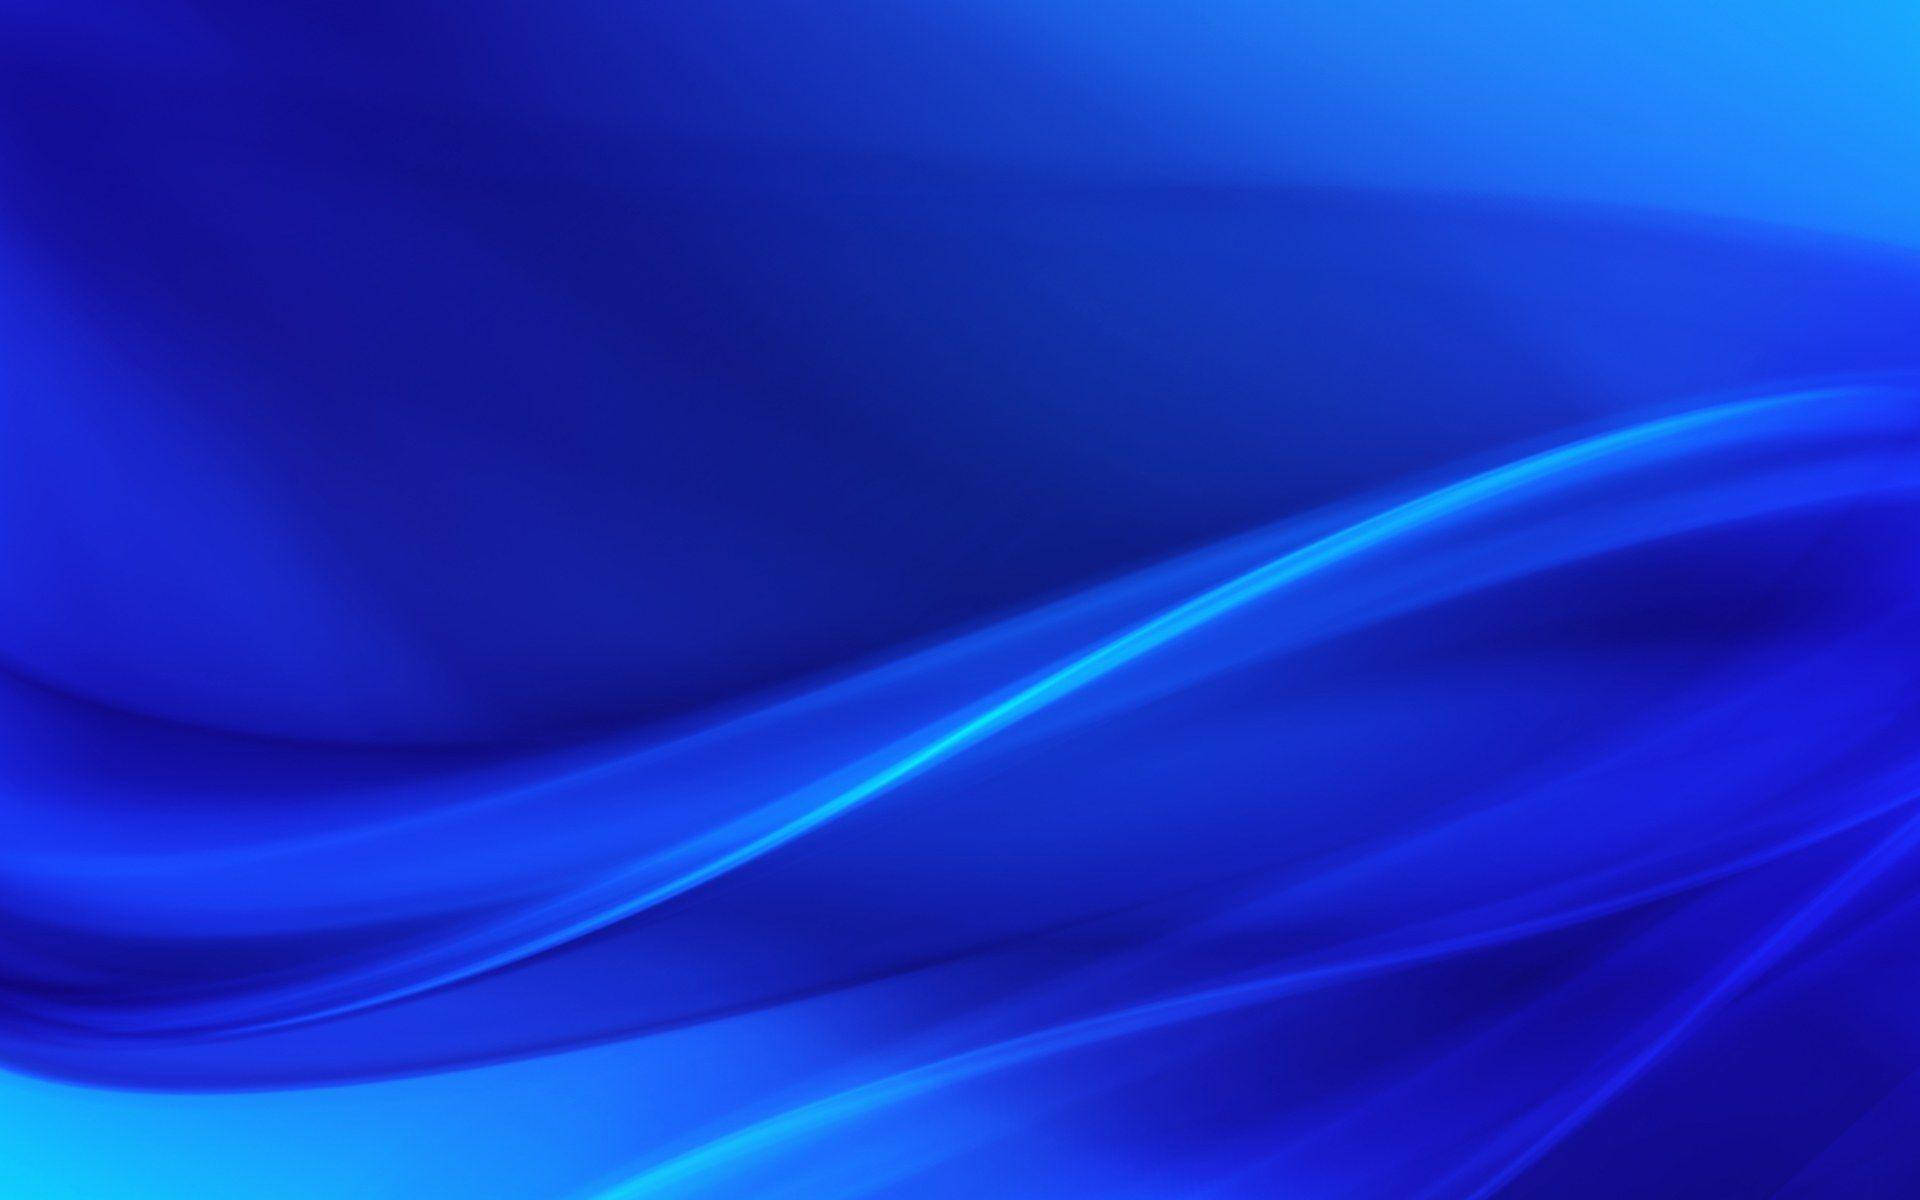 Free Neon Blue Wallpaper Downloads, [200+] Neon Blue Wallpapers for FREE |  